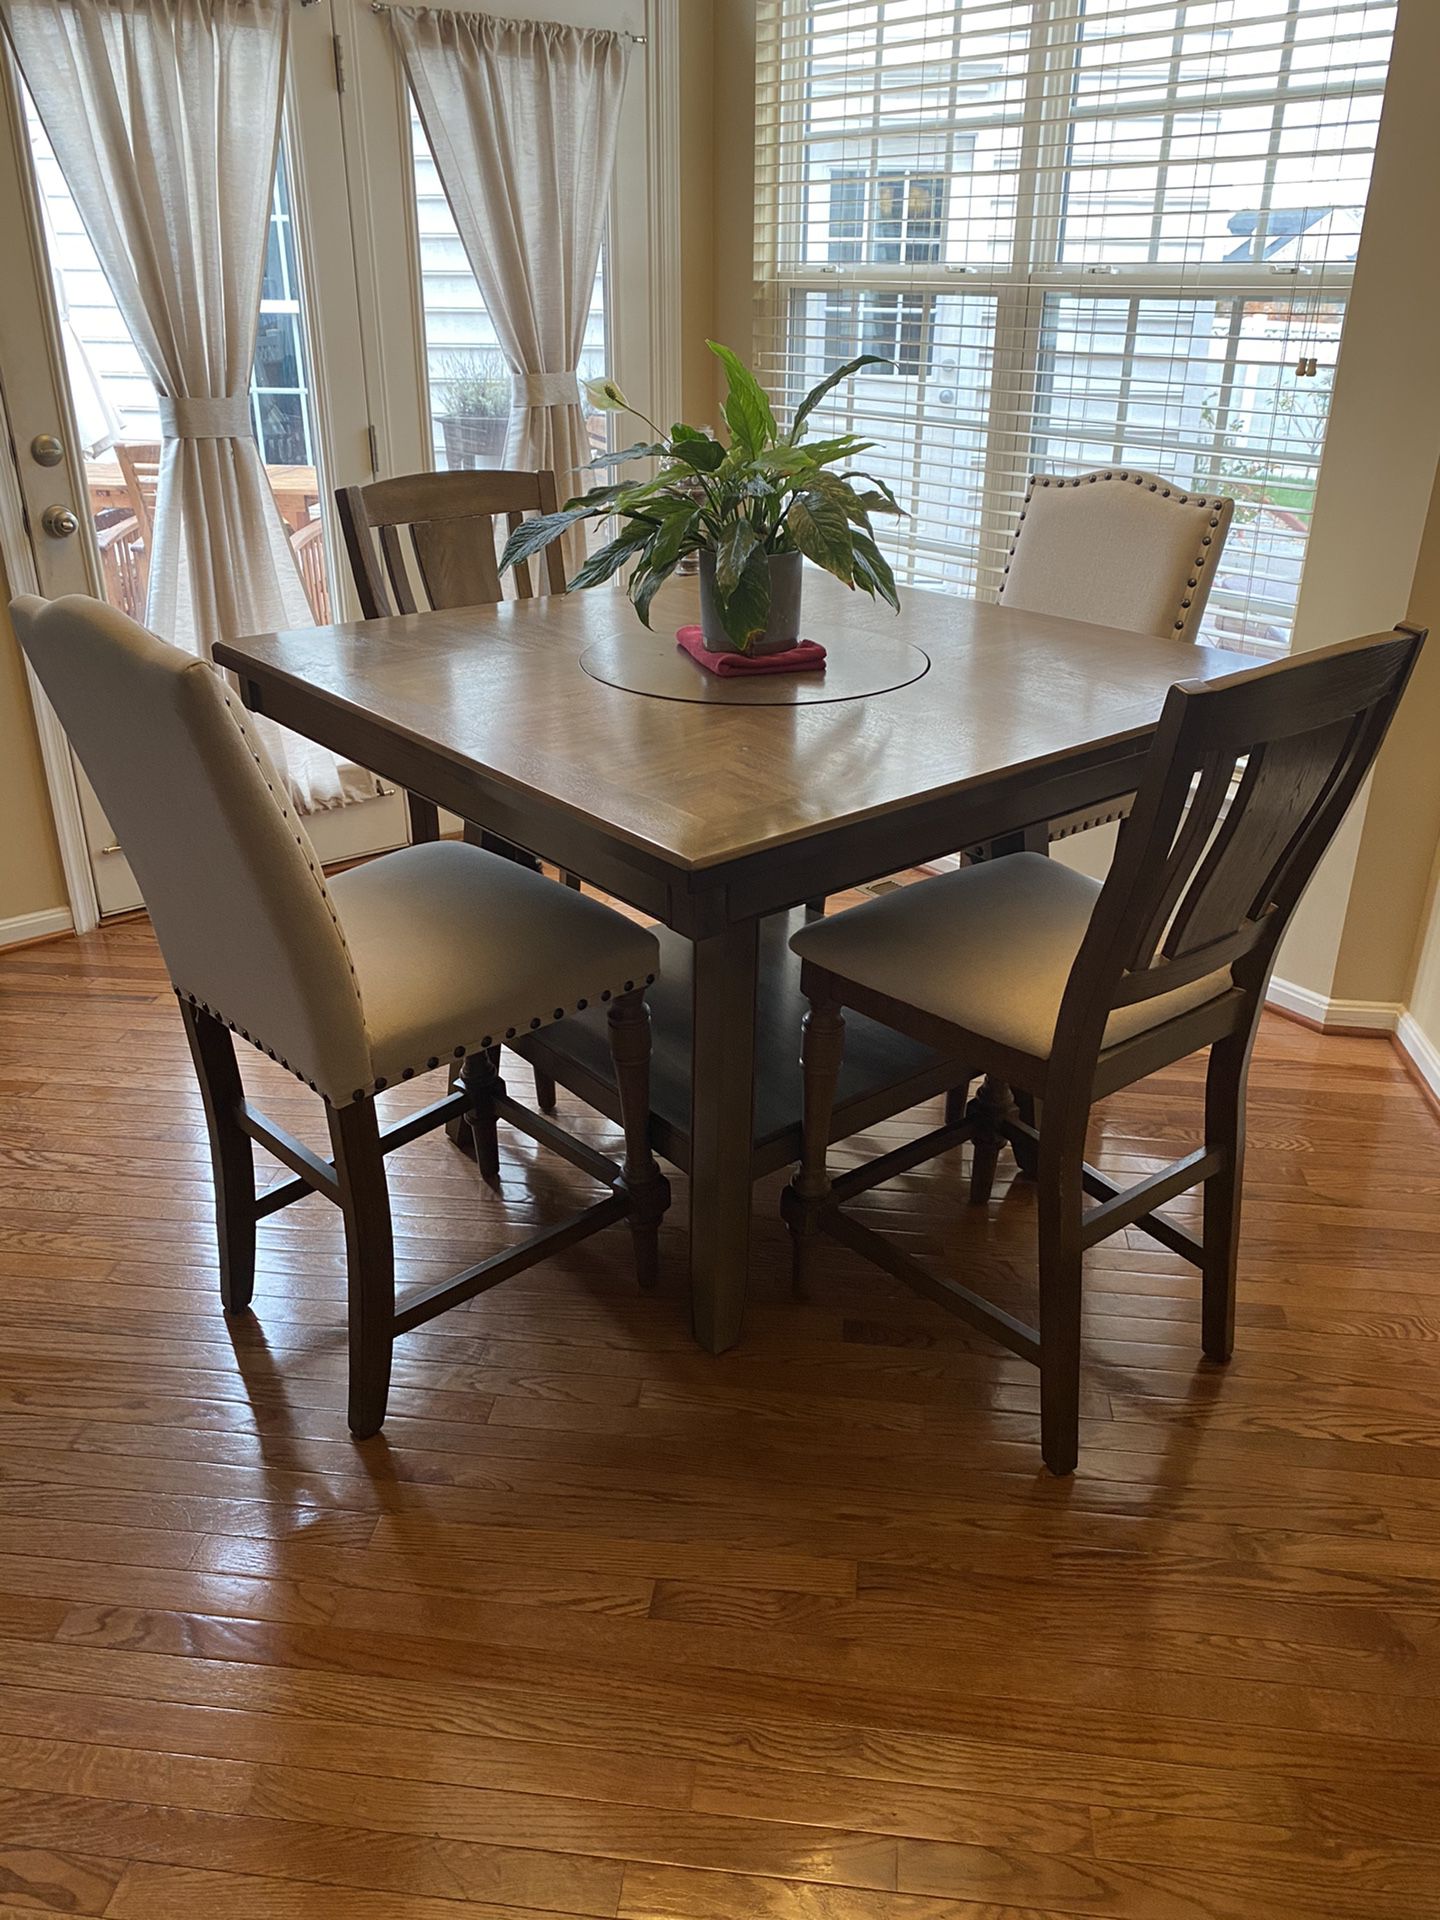 Dinette with four chairs